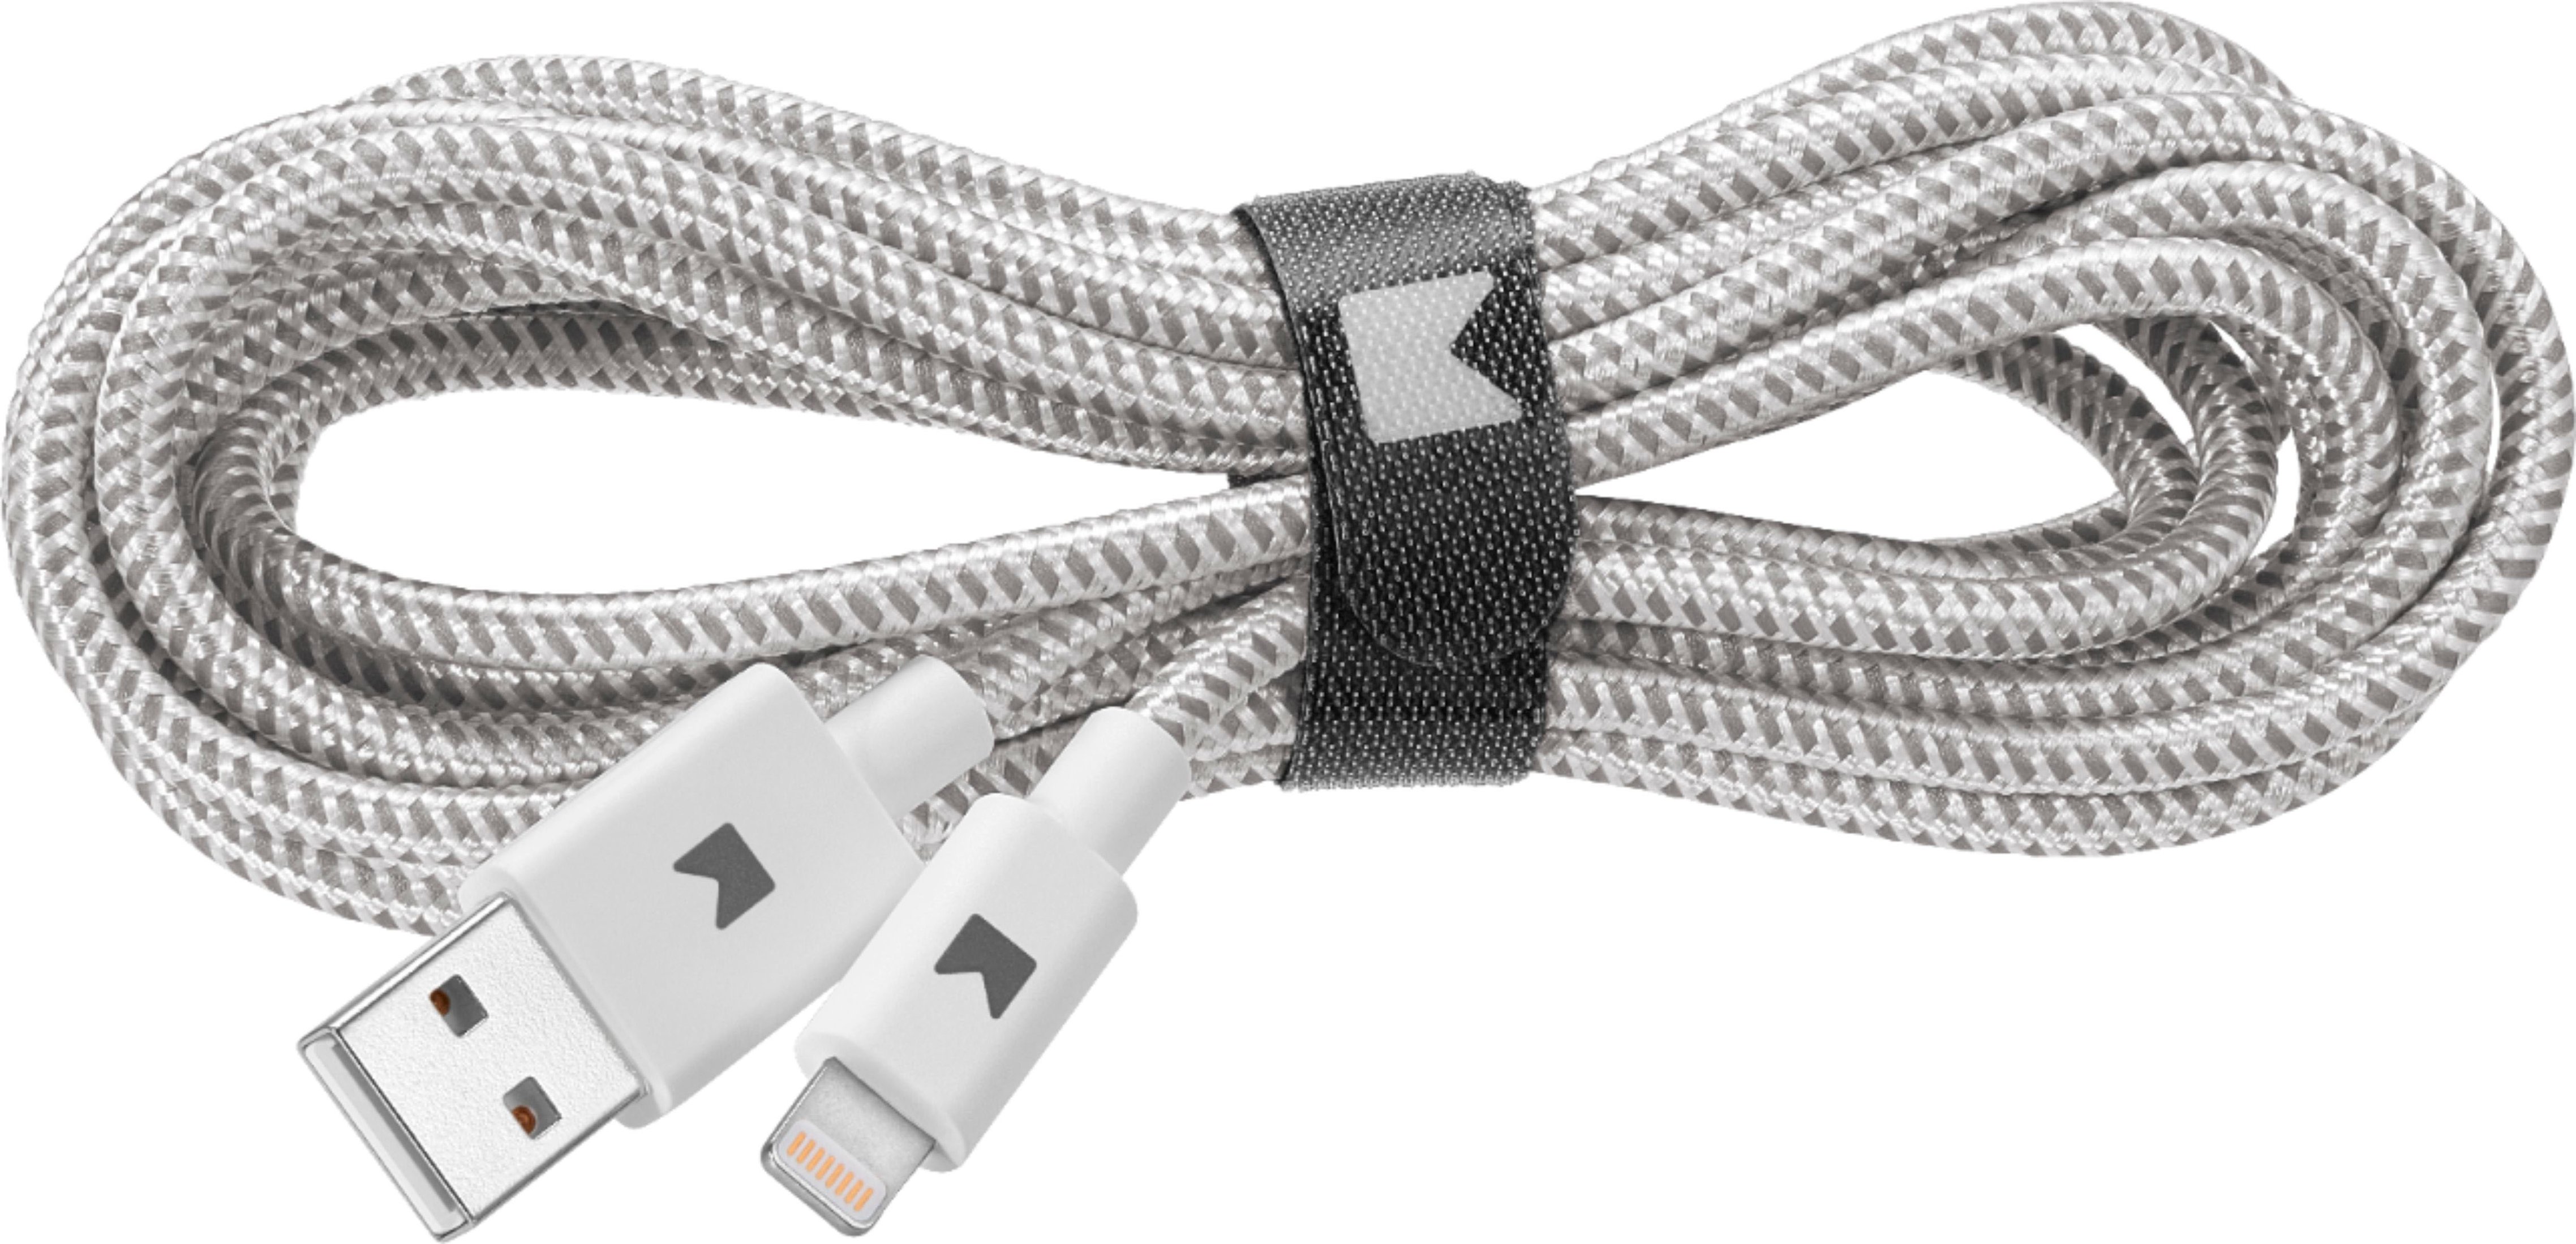 Modal™ Apple MFi Certified 10' Lightning USB Charging Cable White  MD-MA5WG10 - Best Buy